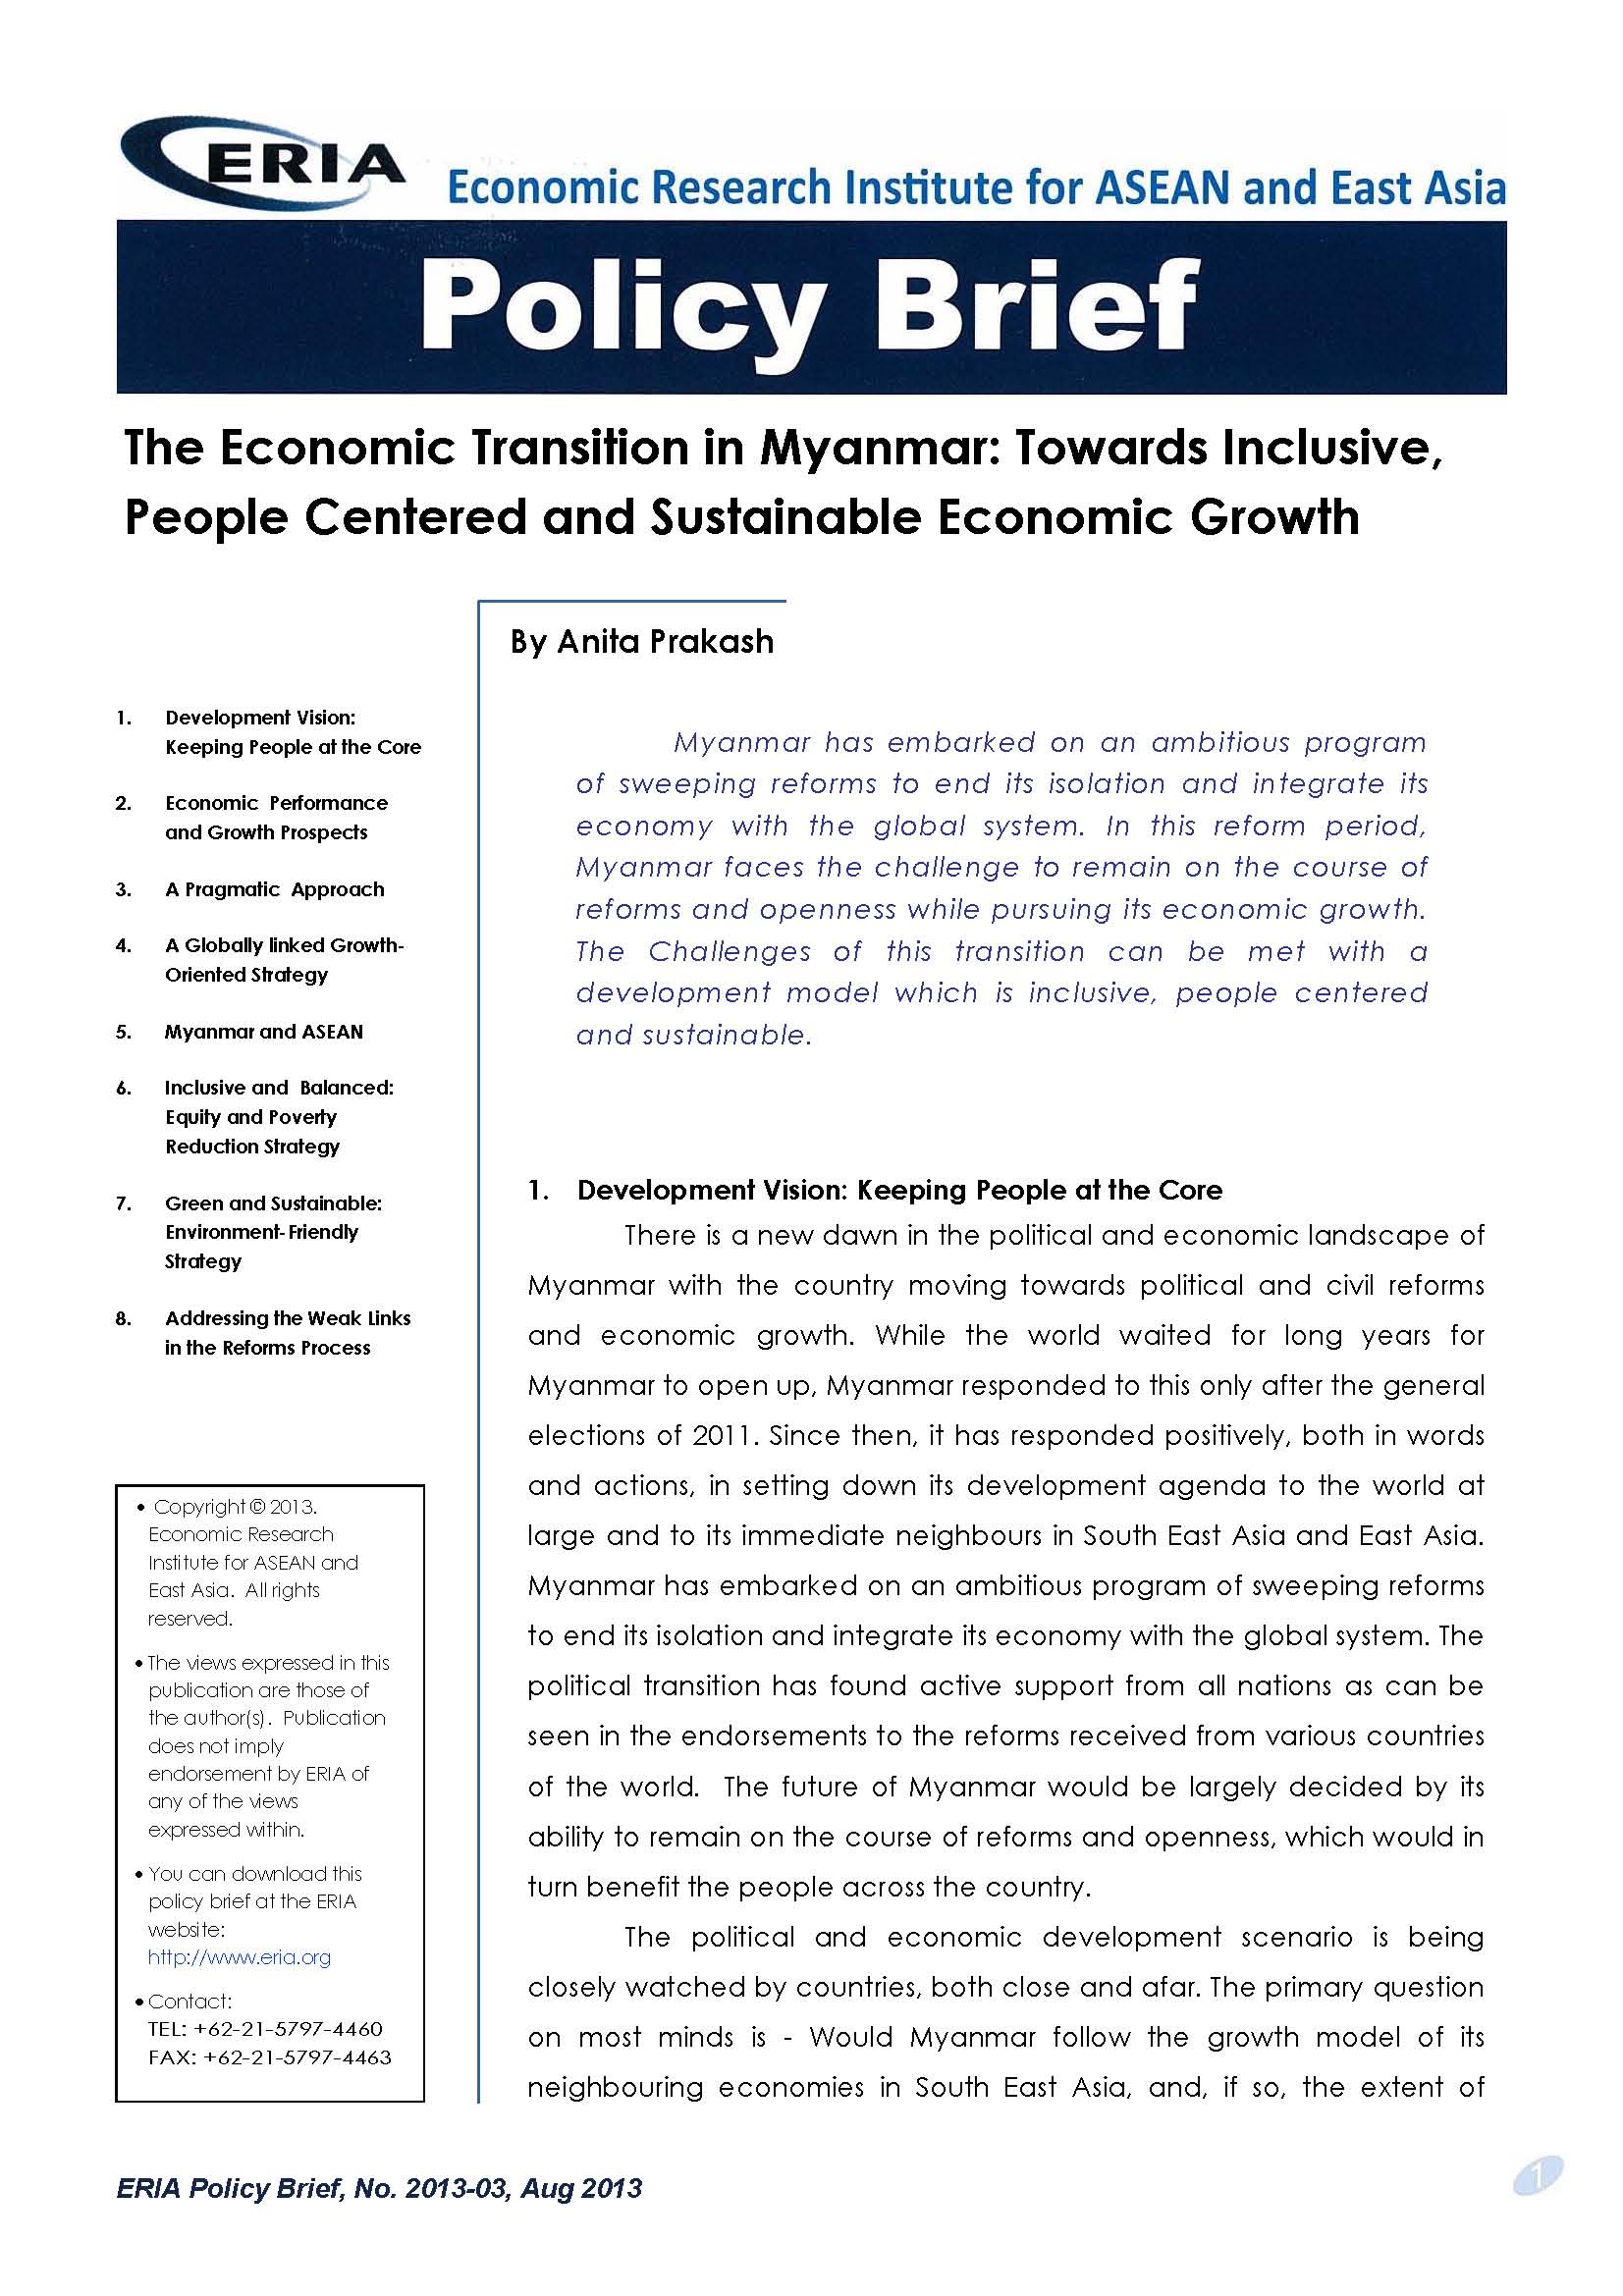 The Economic Transition in Myanmar: Towards Inclusive, People Centered and Sustainable Economic Growth